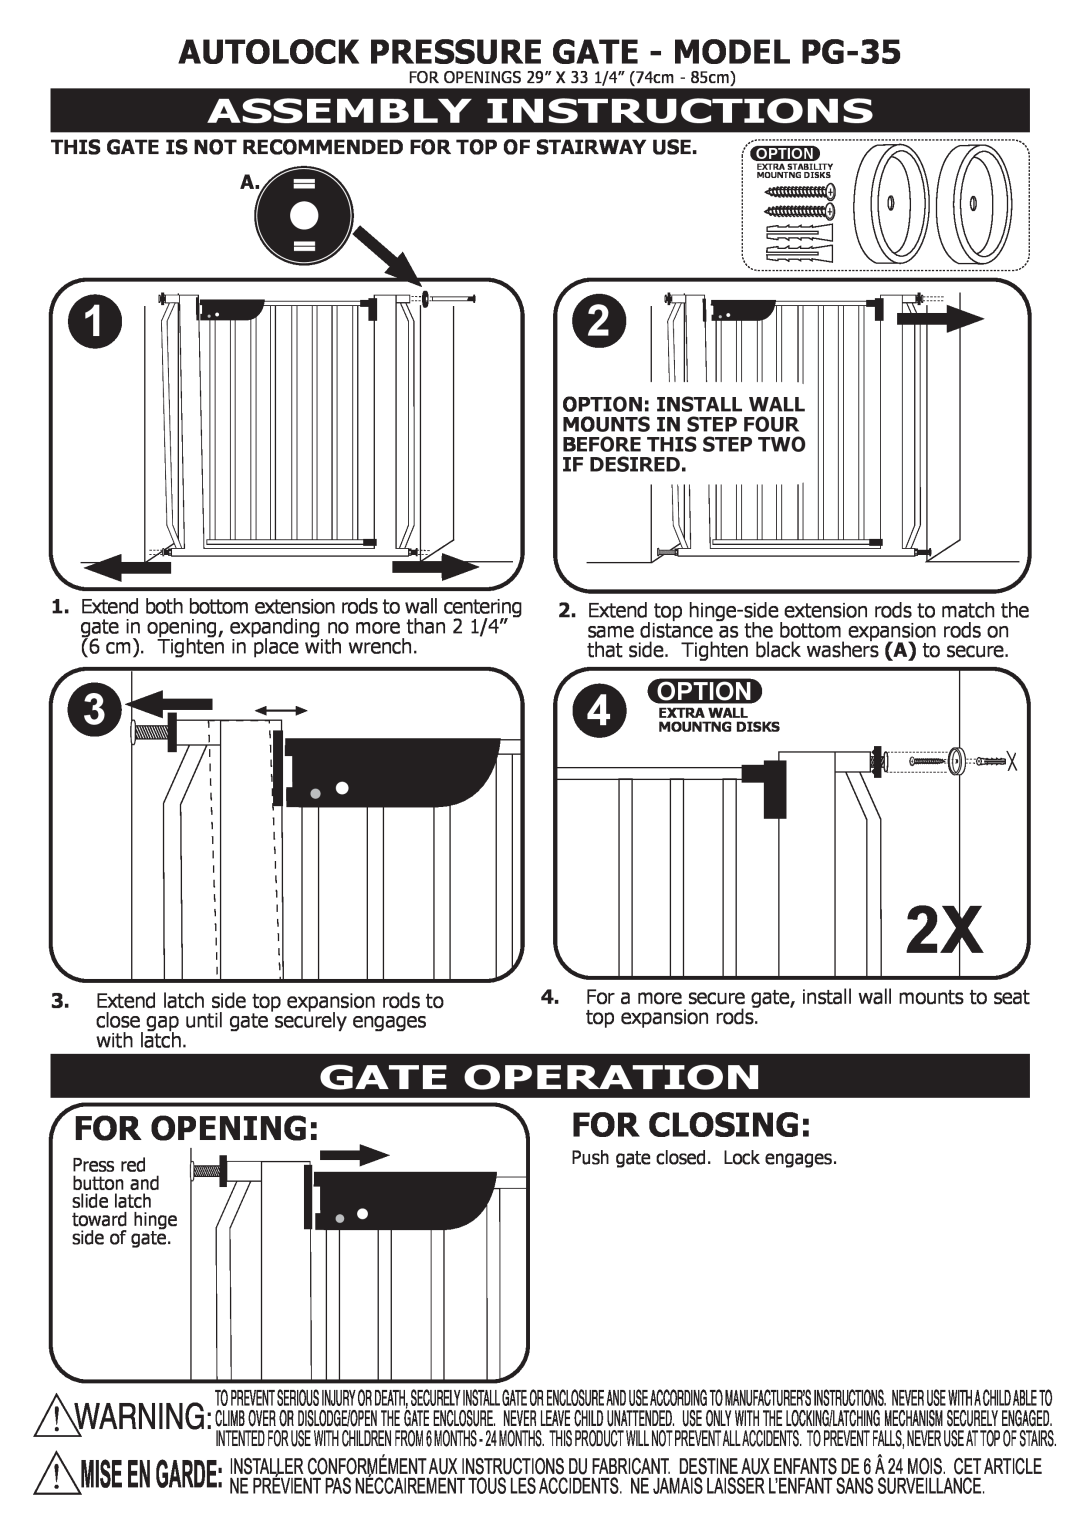 Cardinal Gates PG-35 manual Assembly Instructions, Gate Operation, This Gate Is Not Recommended For Top Of Stairway Use. A 